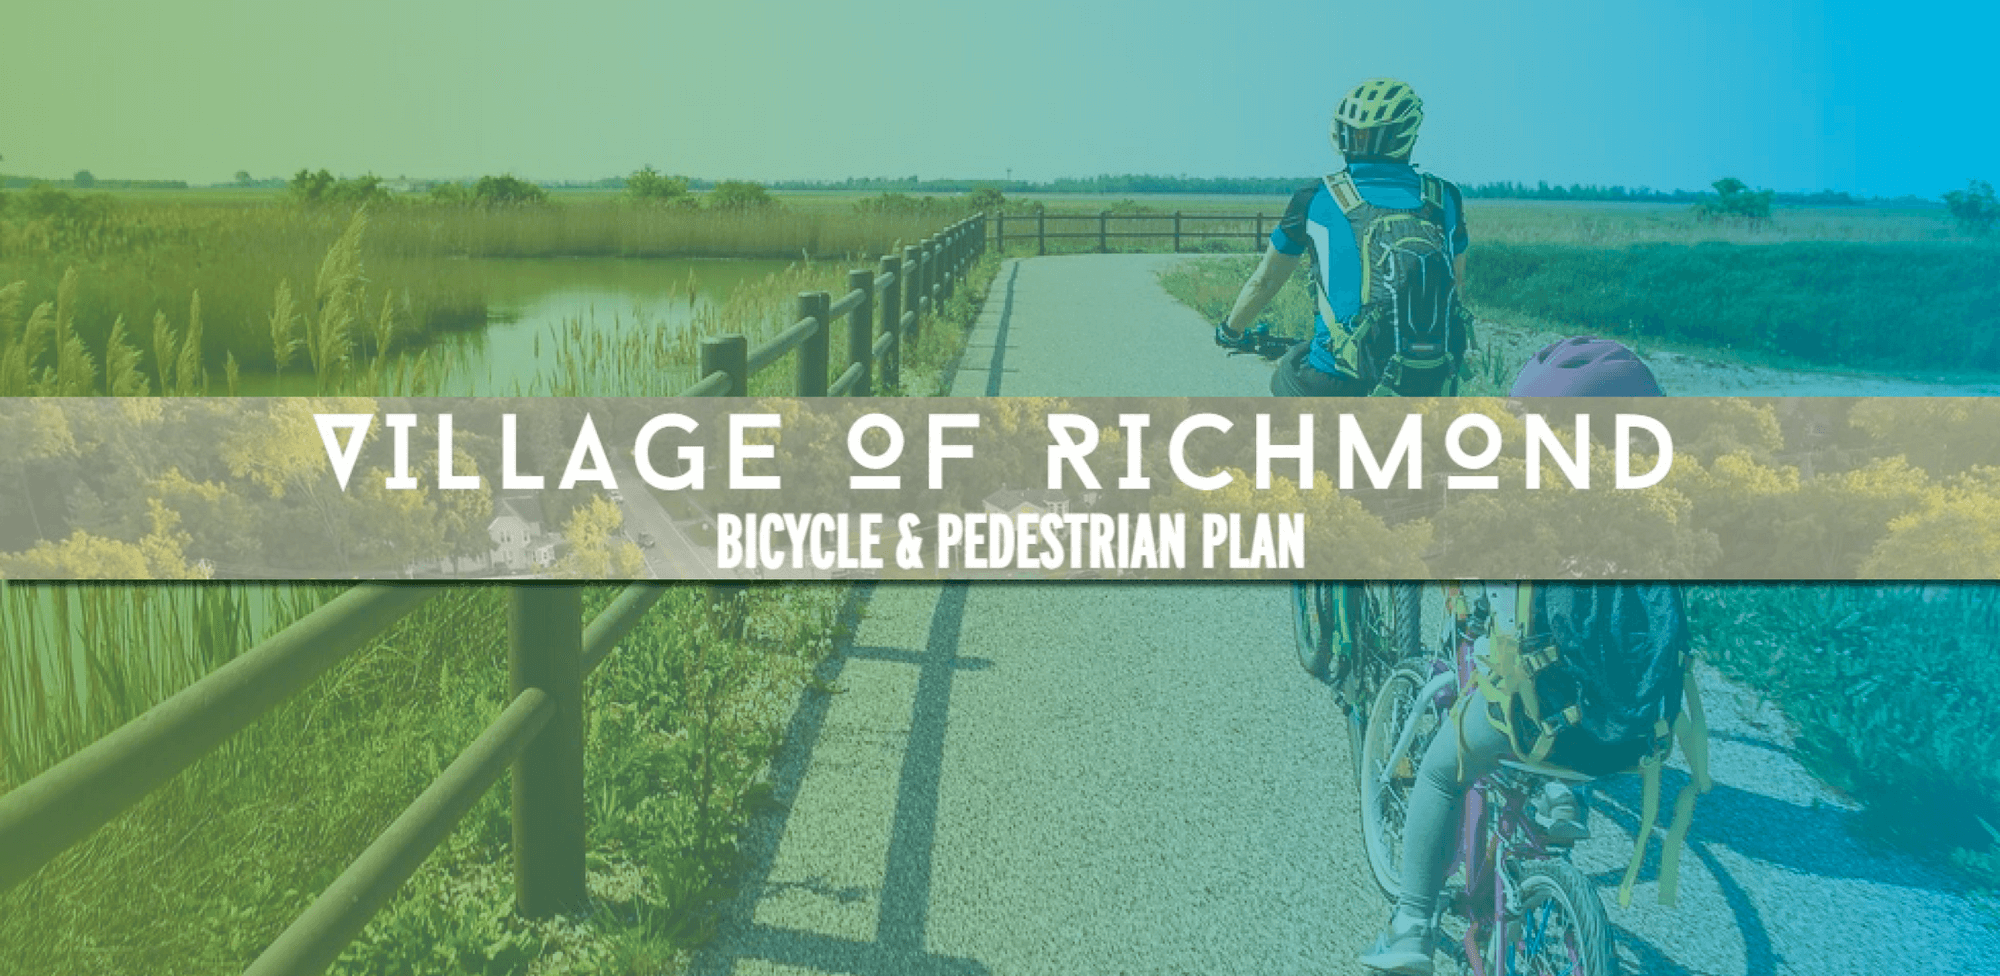 Bike path in Richmond featuring father and child cycling. Text: "Village of Richmond Bicycle and Pedestrian Plan"